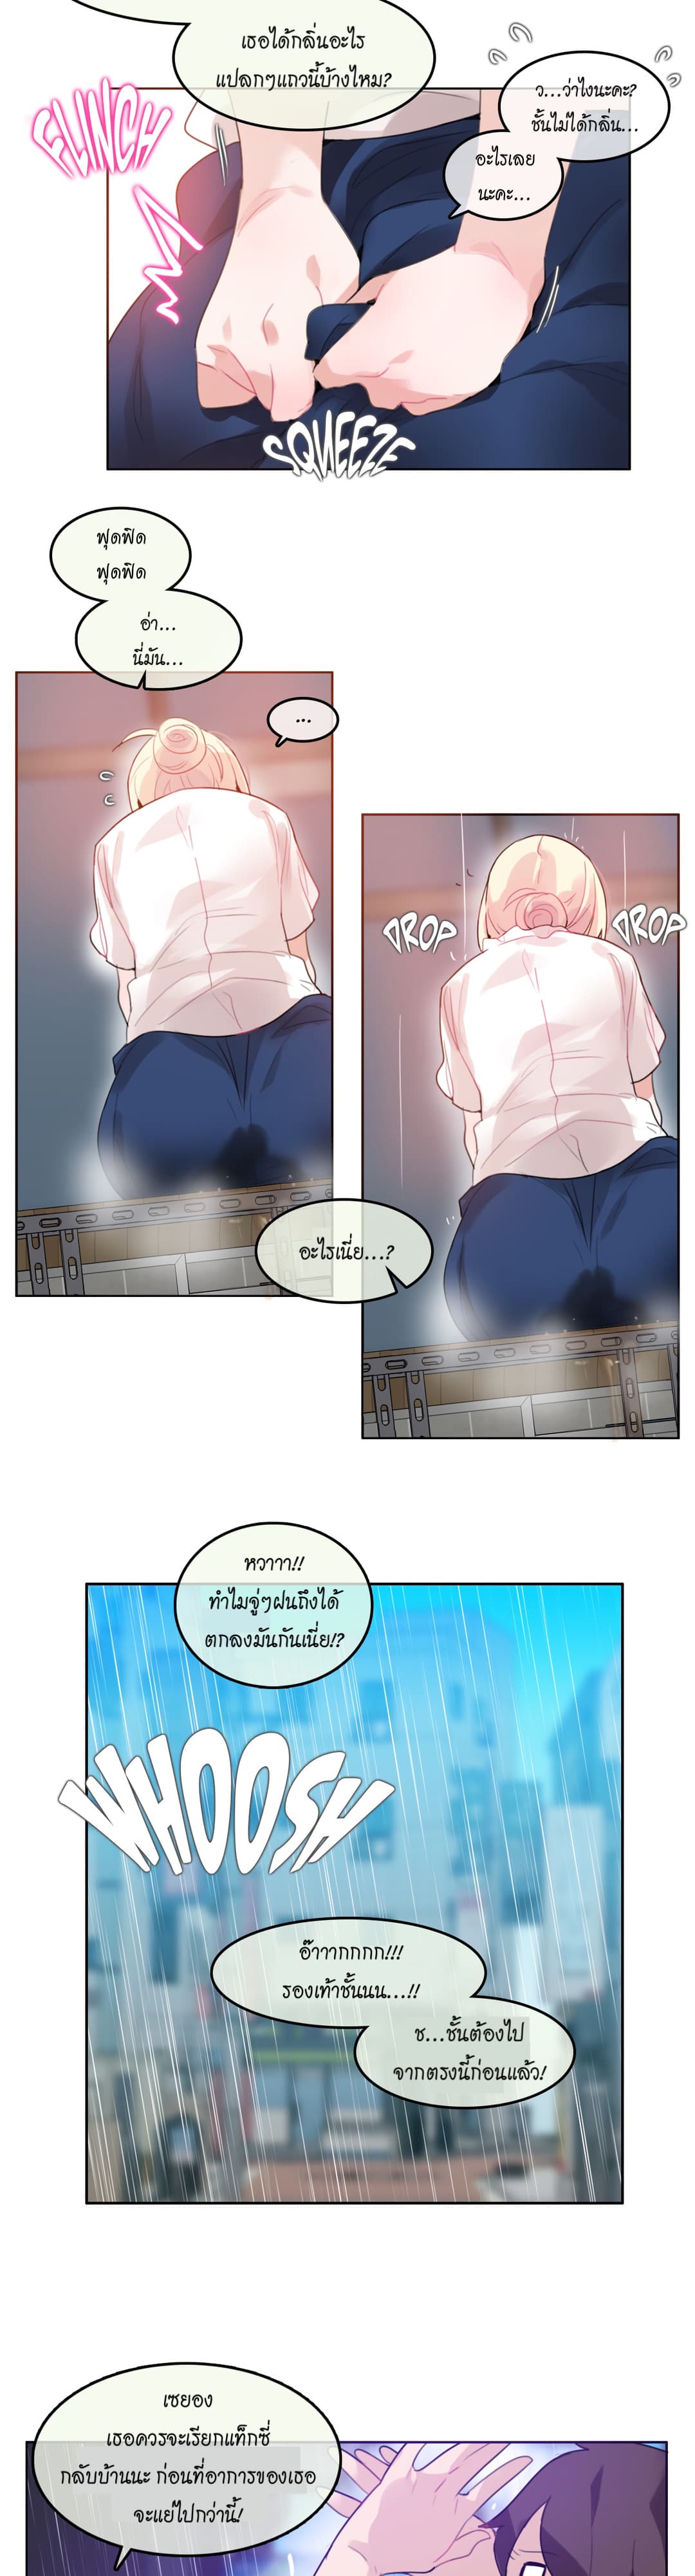 A Pervert’s Daily Life 36 (4)